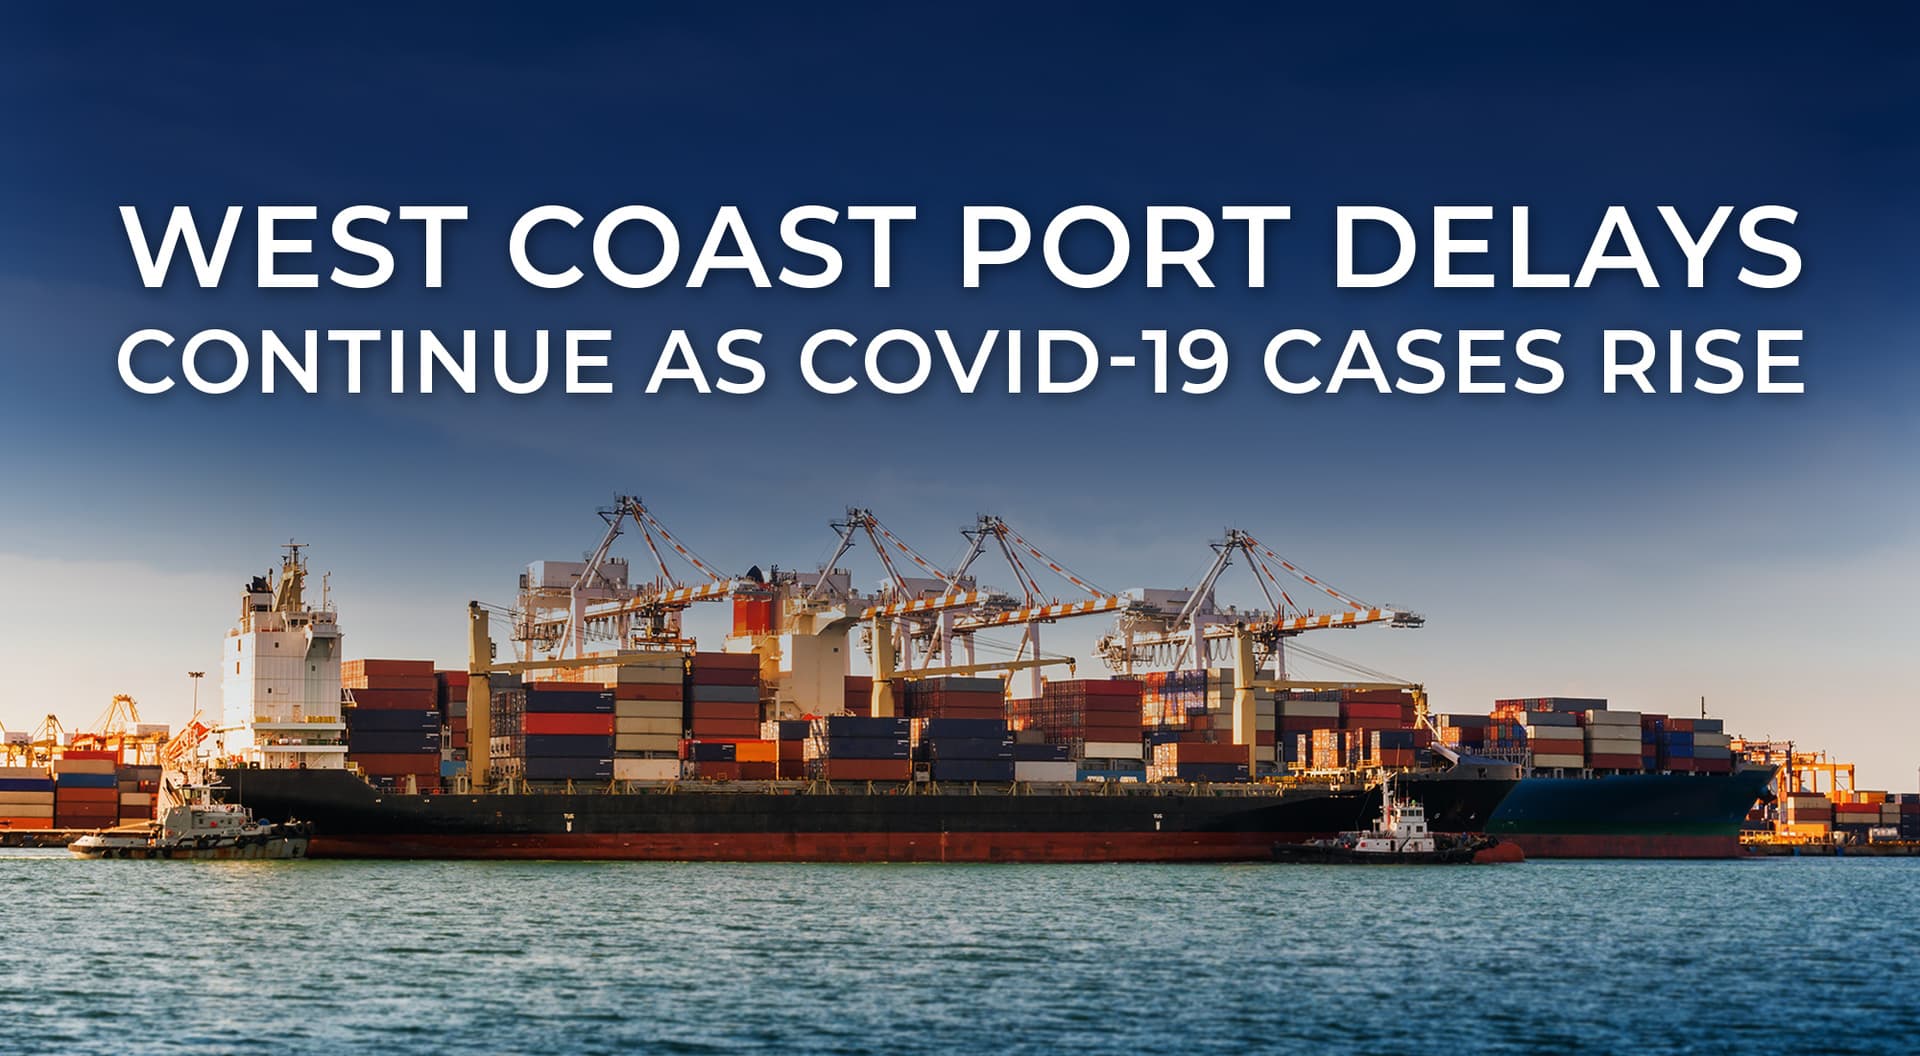 West Coast Port Delays Continue as COVID-19 Cases Rise